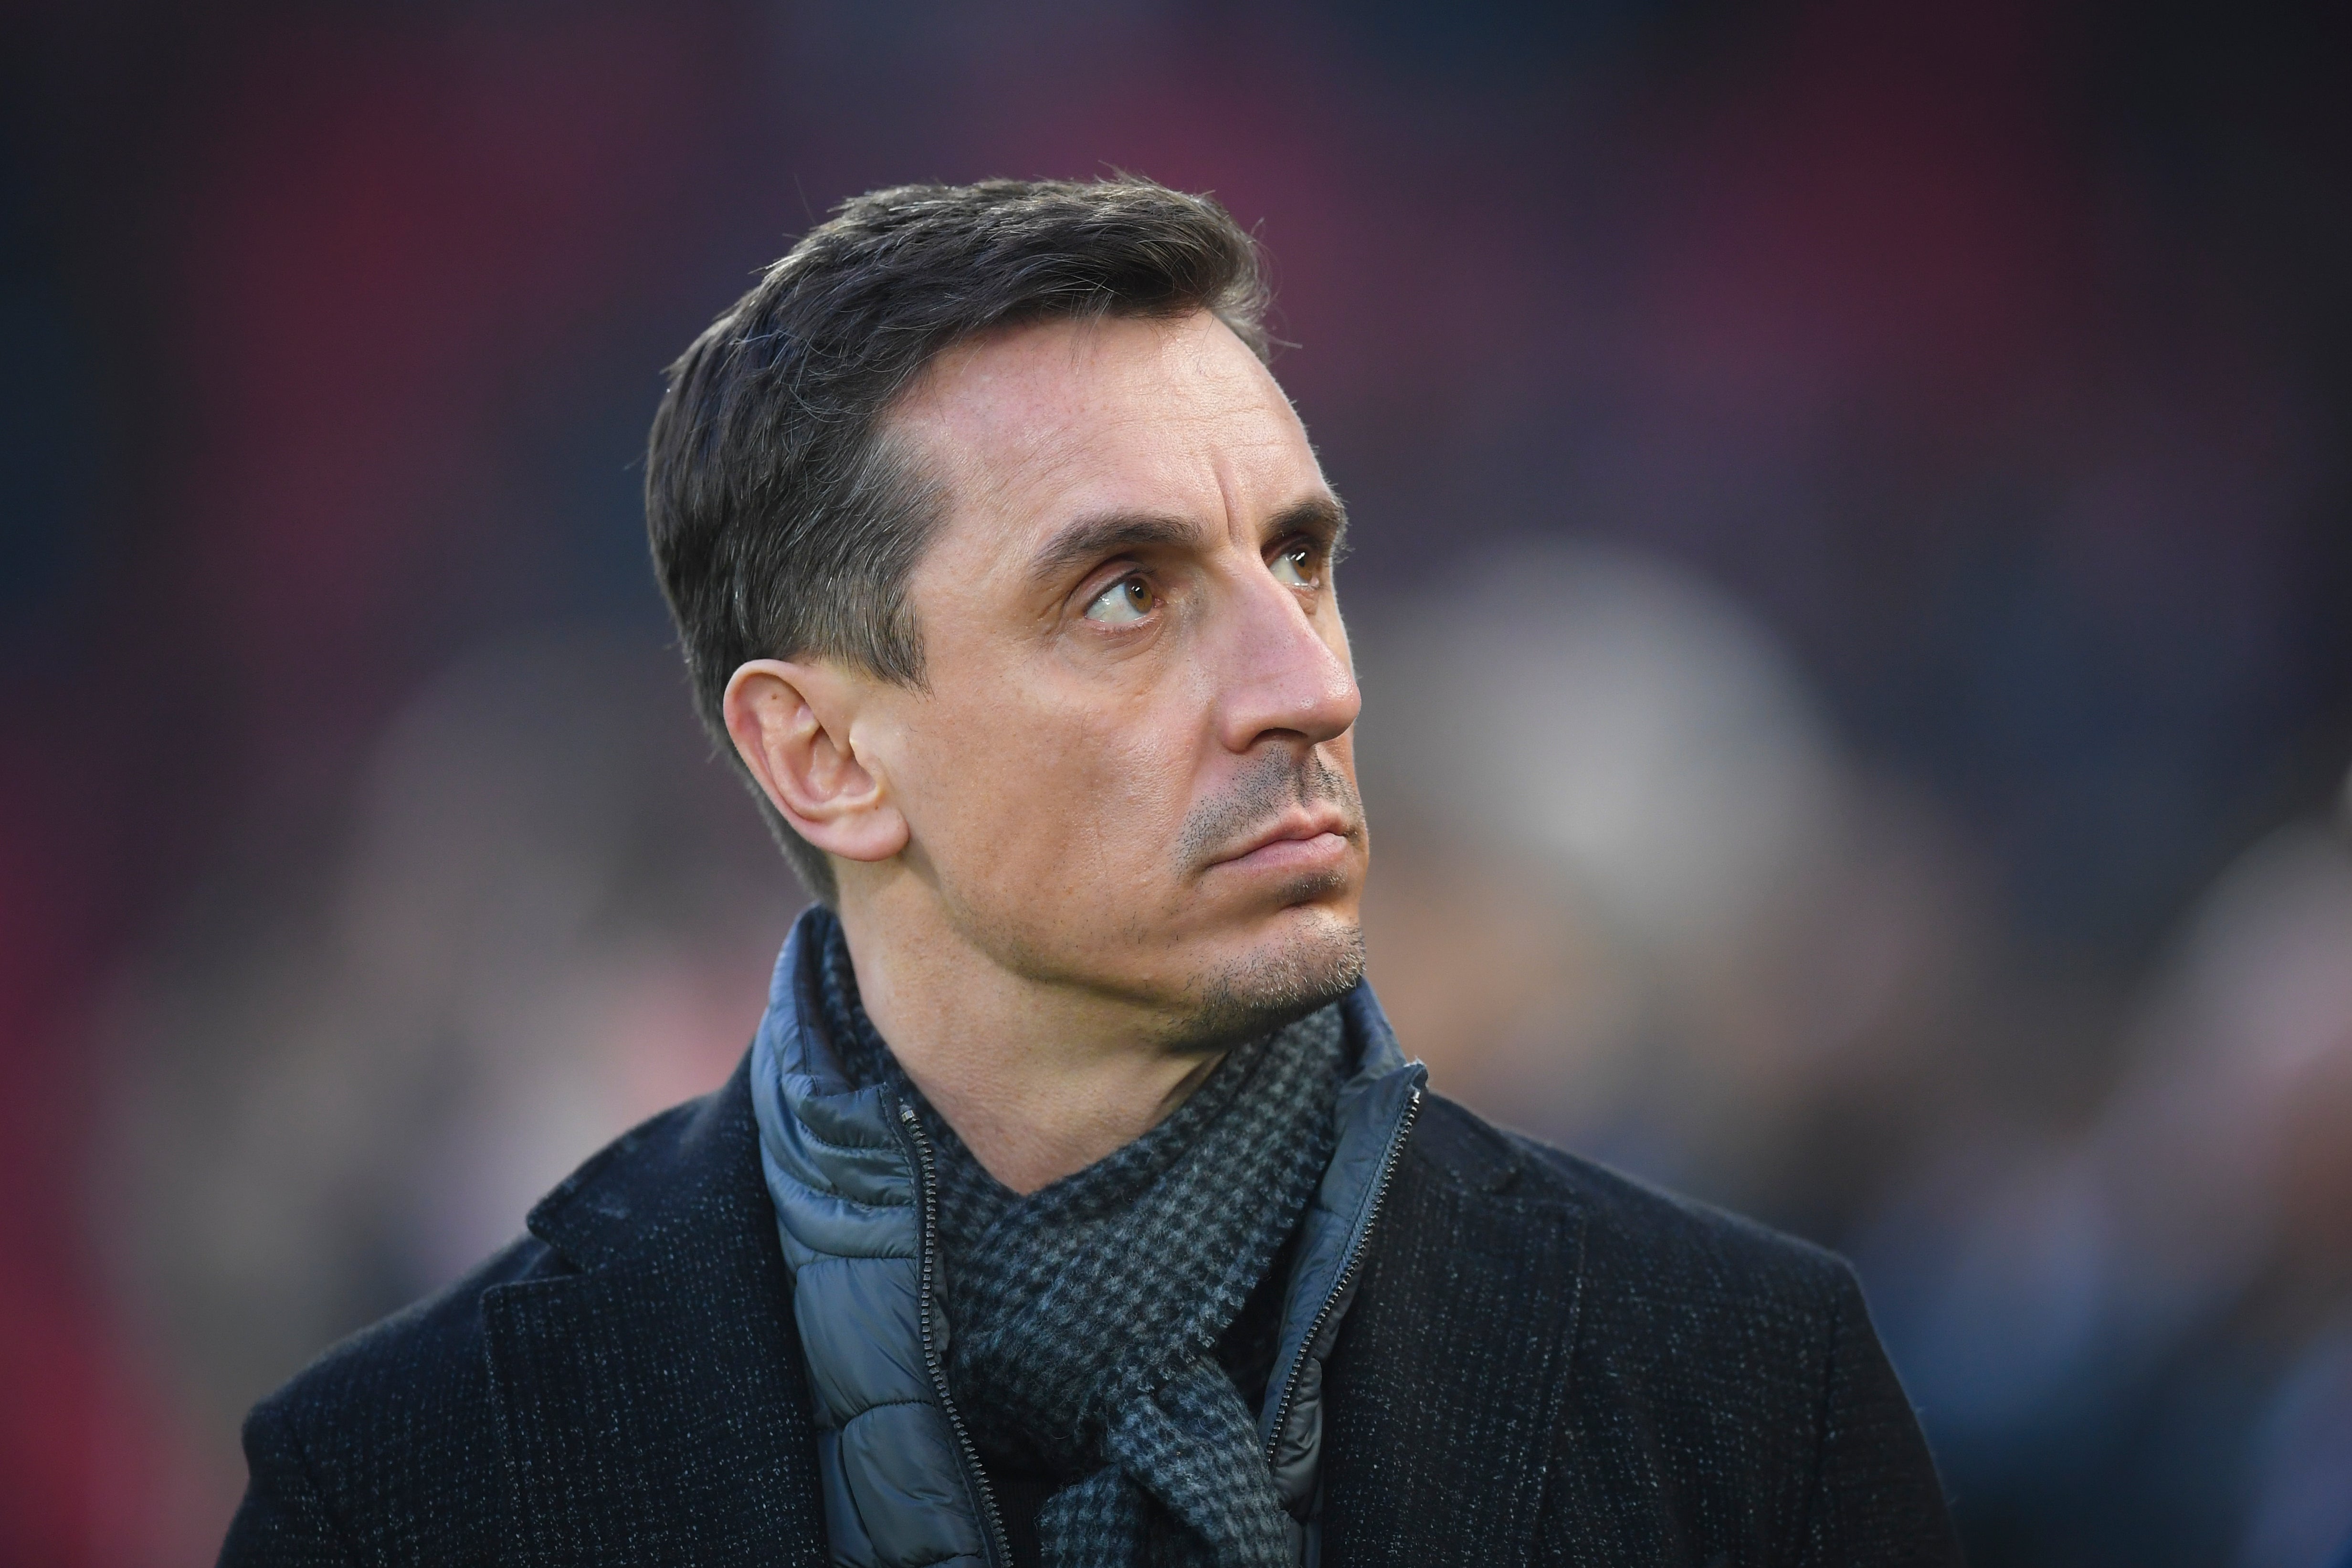 Gary Neville believes Manchester United do not play with enough team cohesion to win the Premier League